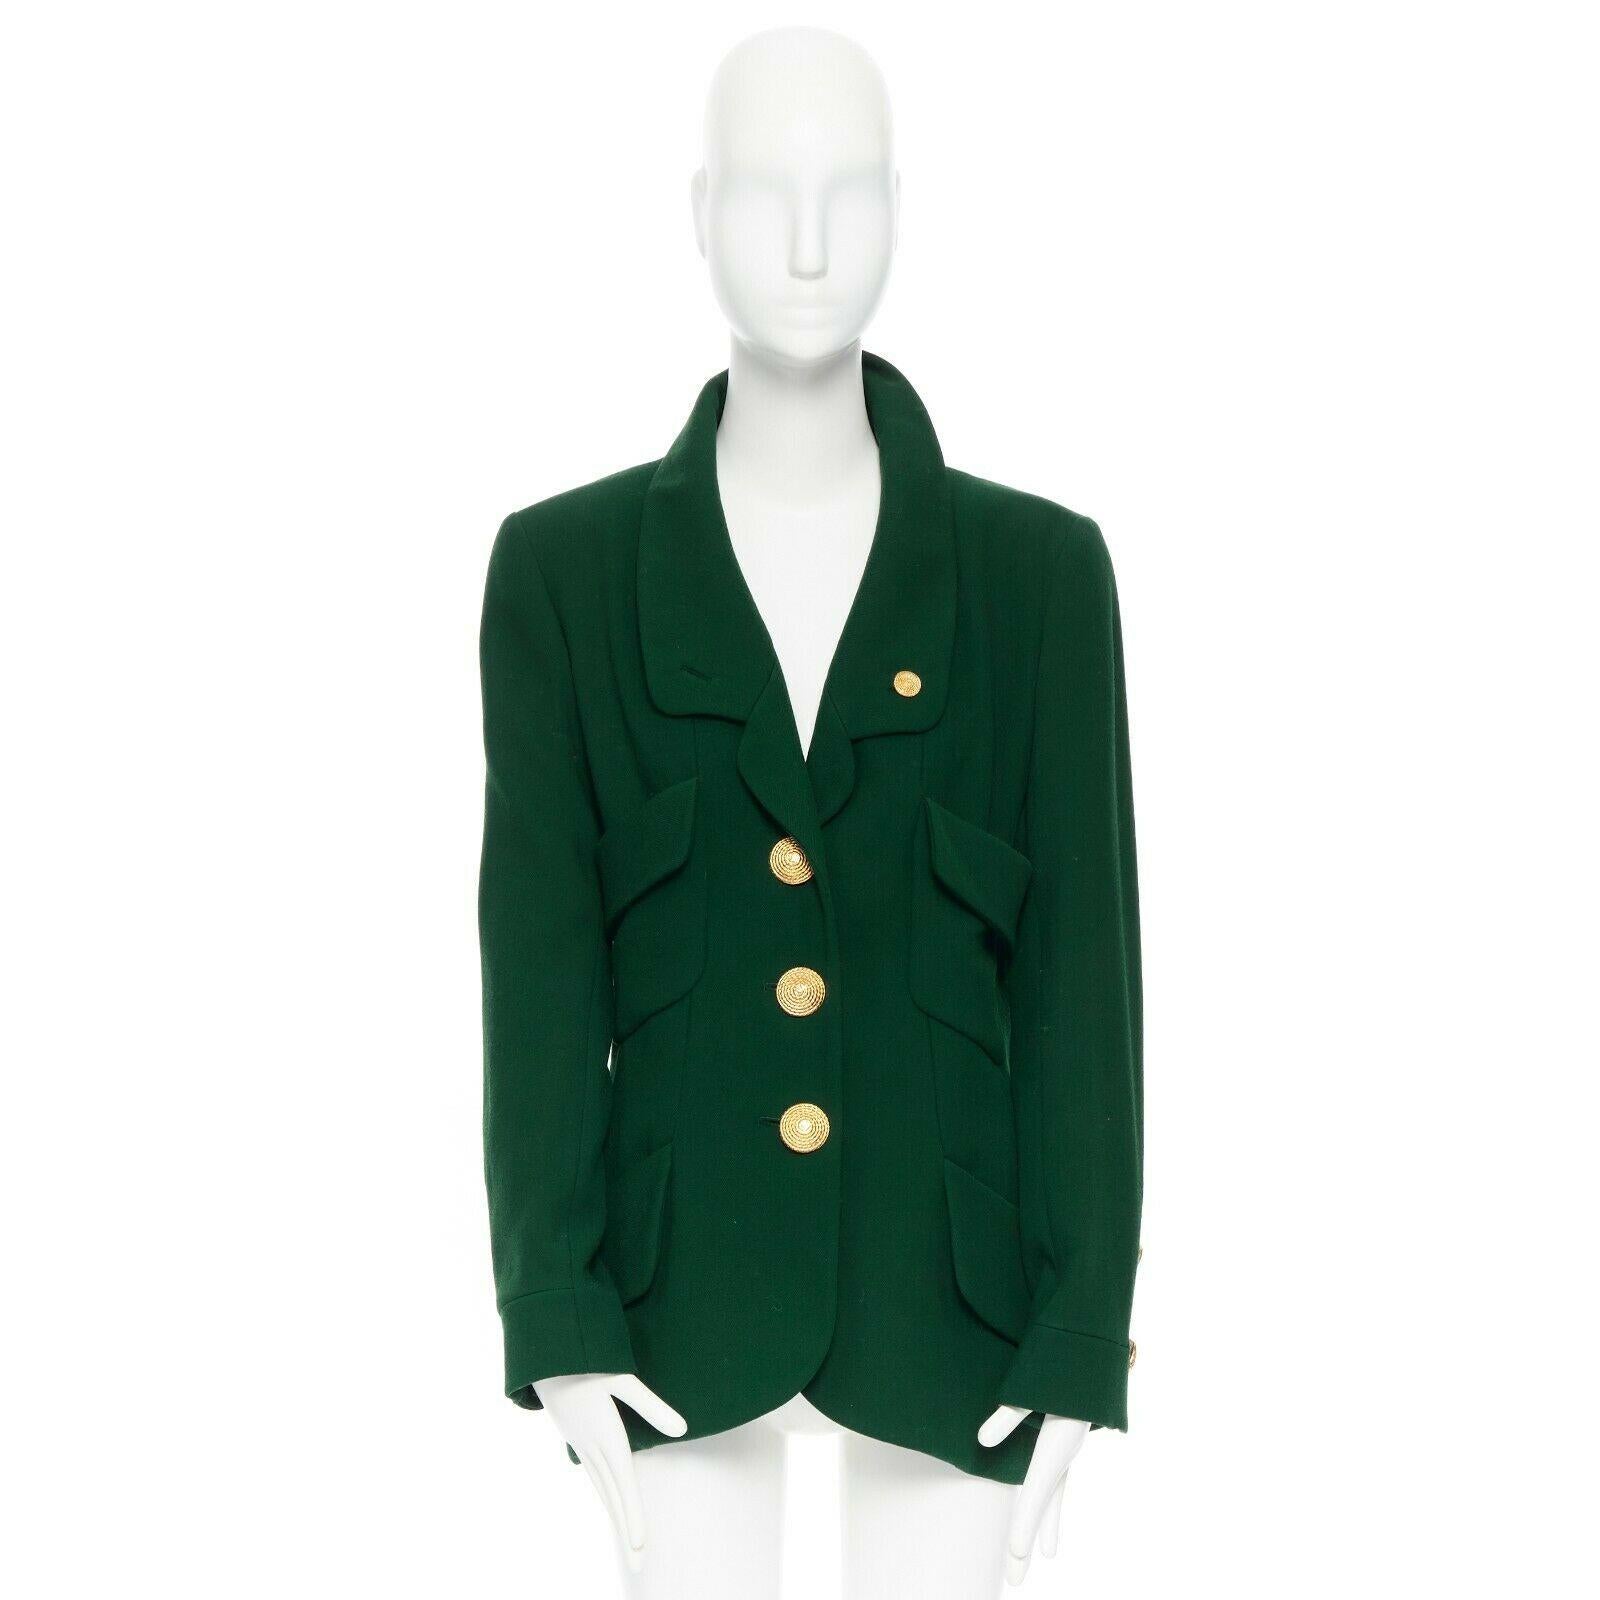 green jacket with gold buttons